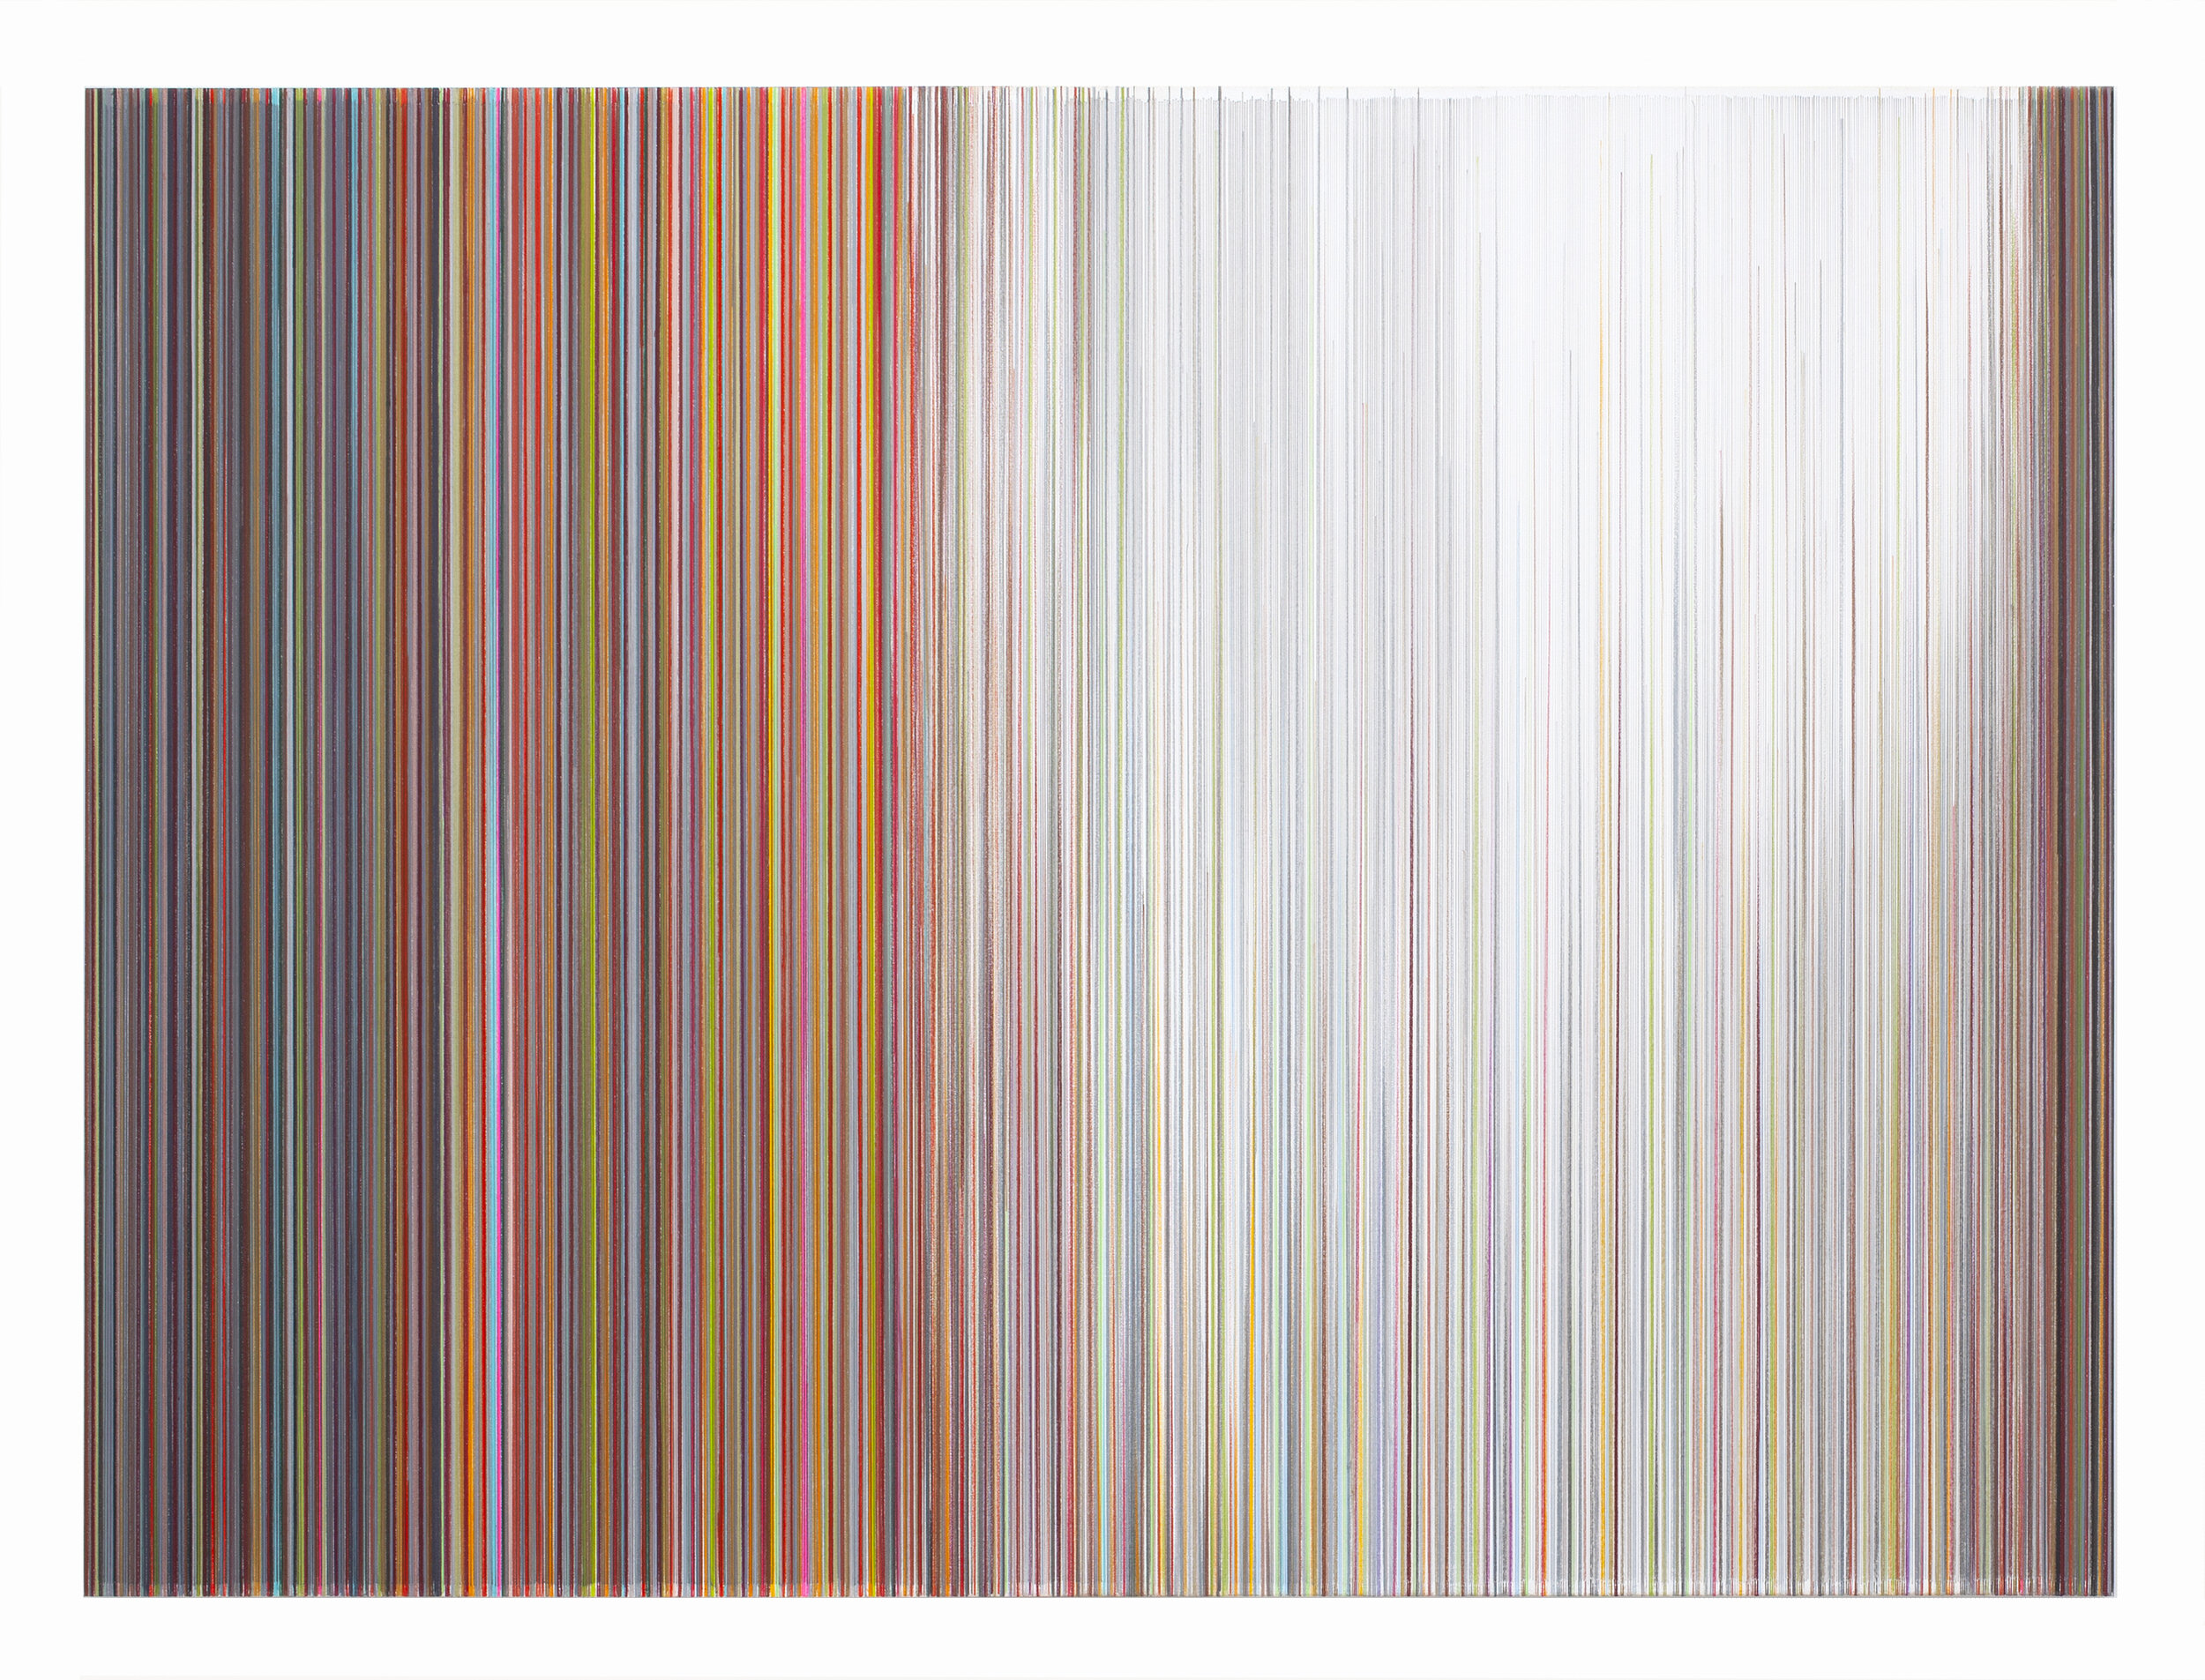    seeing in cycles   2020 graphite and colored pencil on mat board 34 by 46 inches included in   Everyday   at Haw Contemporary June 18 - August 6, 2021 